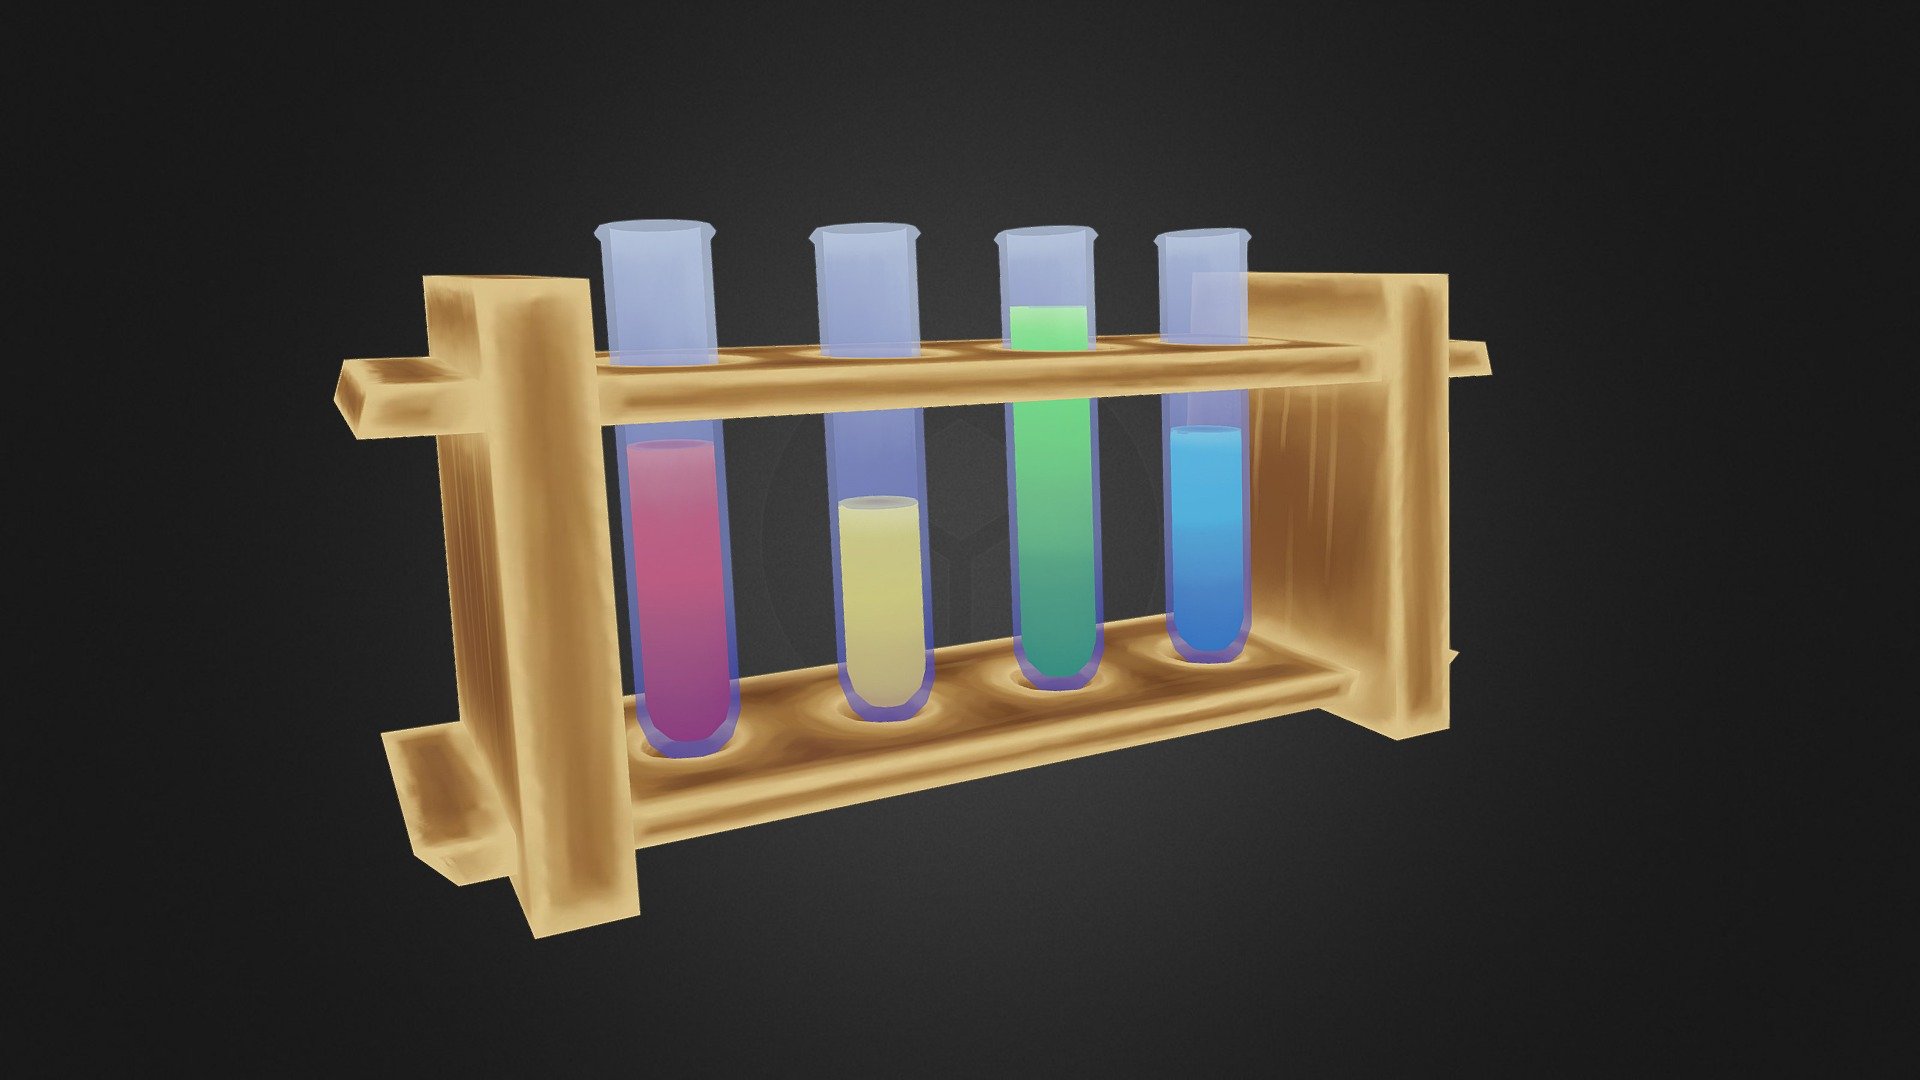 Small asset to use as an example for a uni project 3d model